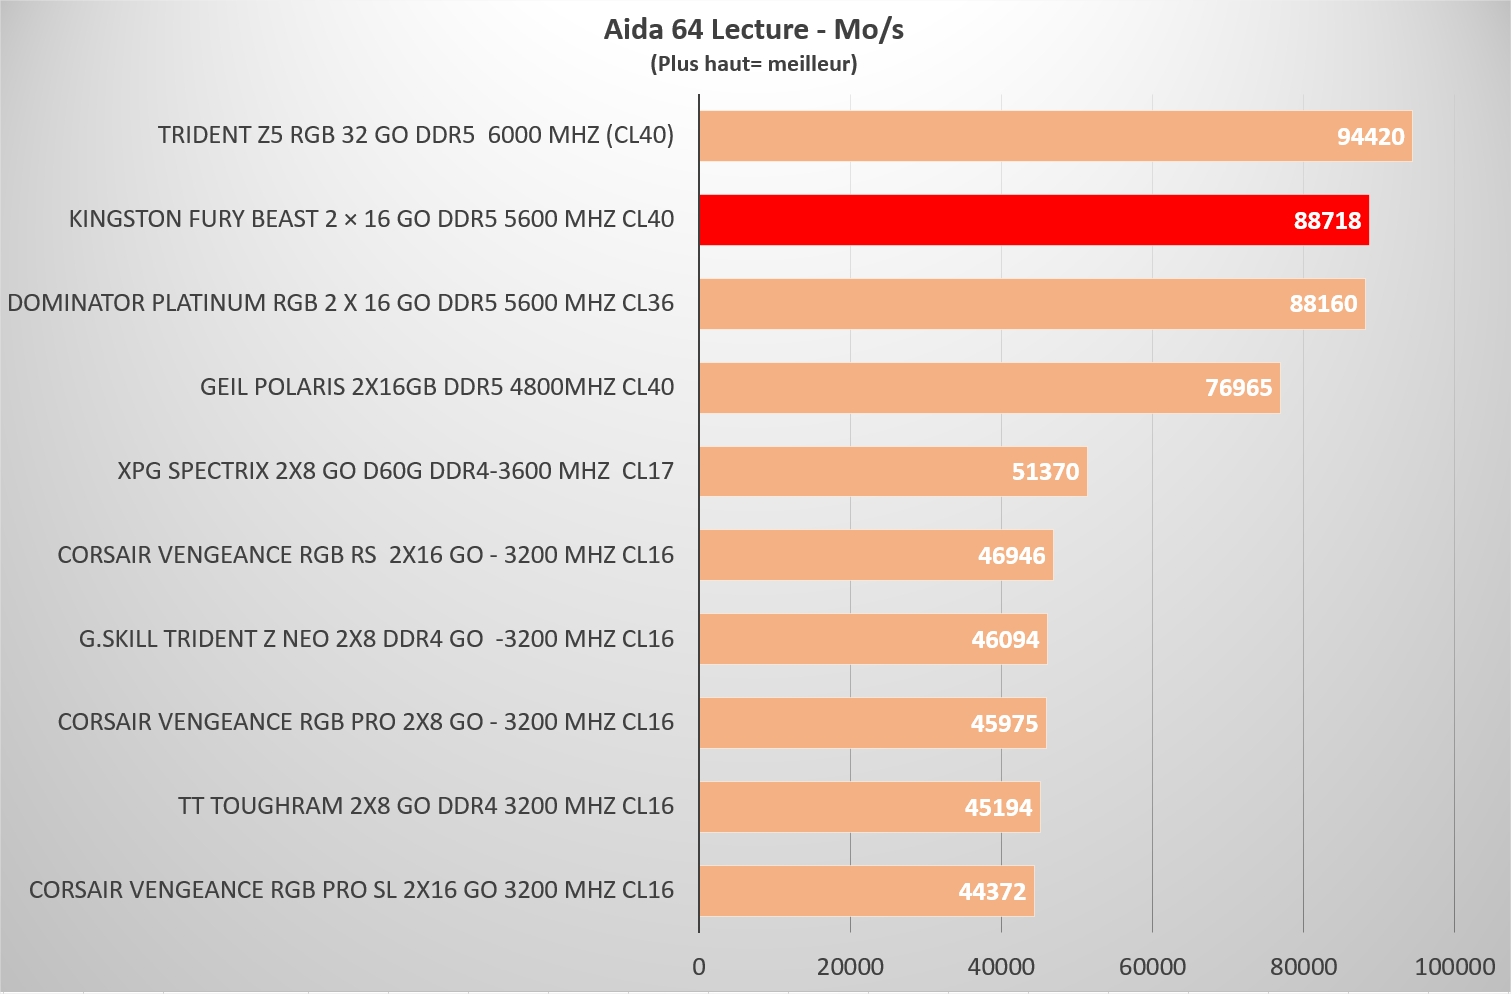 Ddr5 Kingston Fury Beast 5600 Mhz Aida 64 Score Lecture